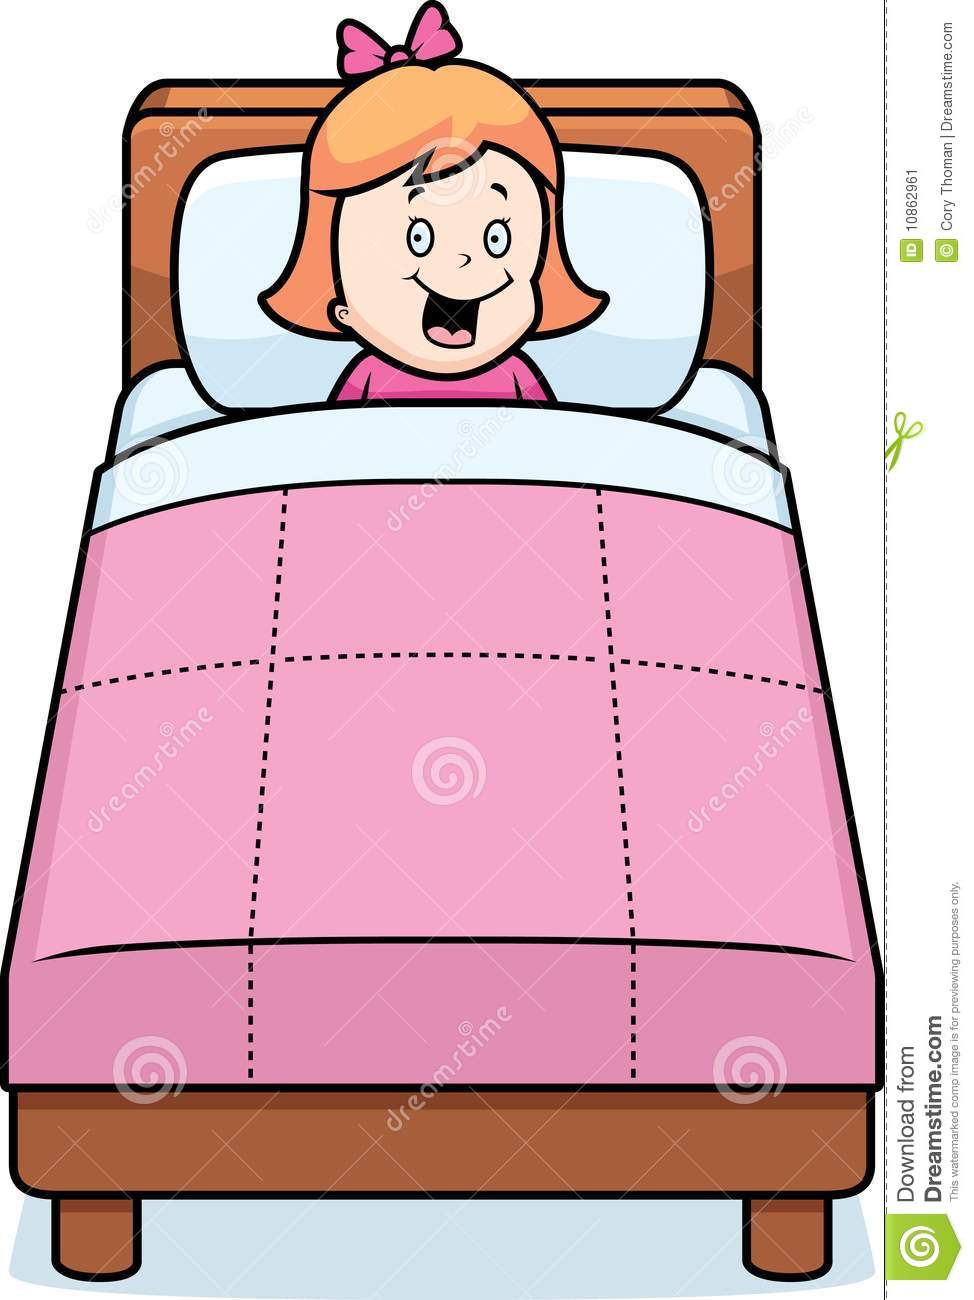 Going bed clipart.